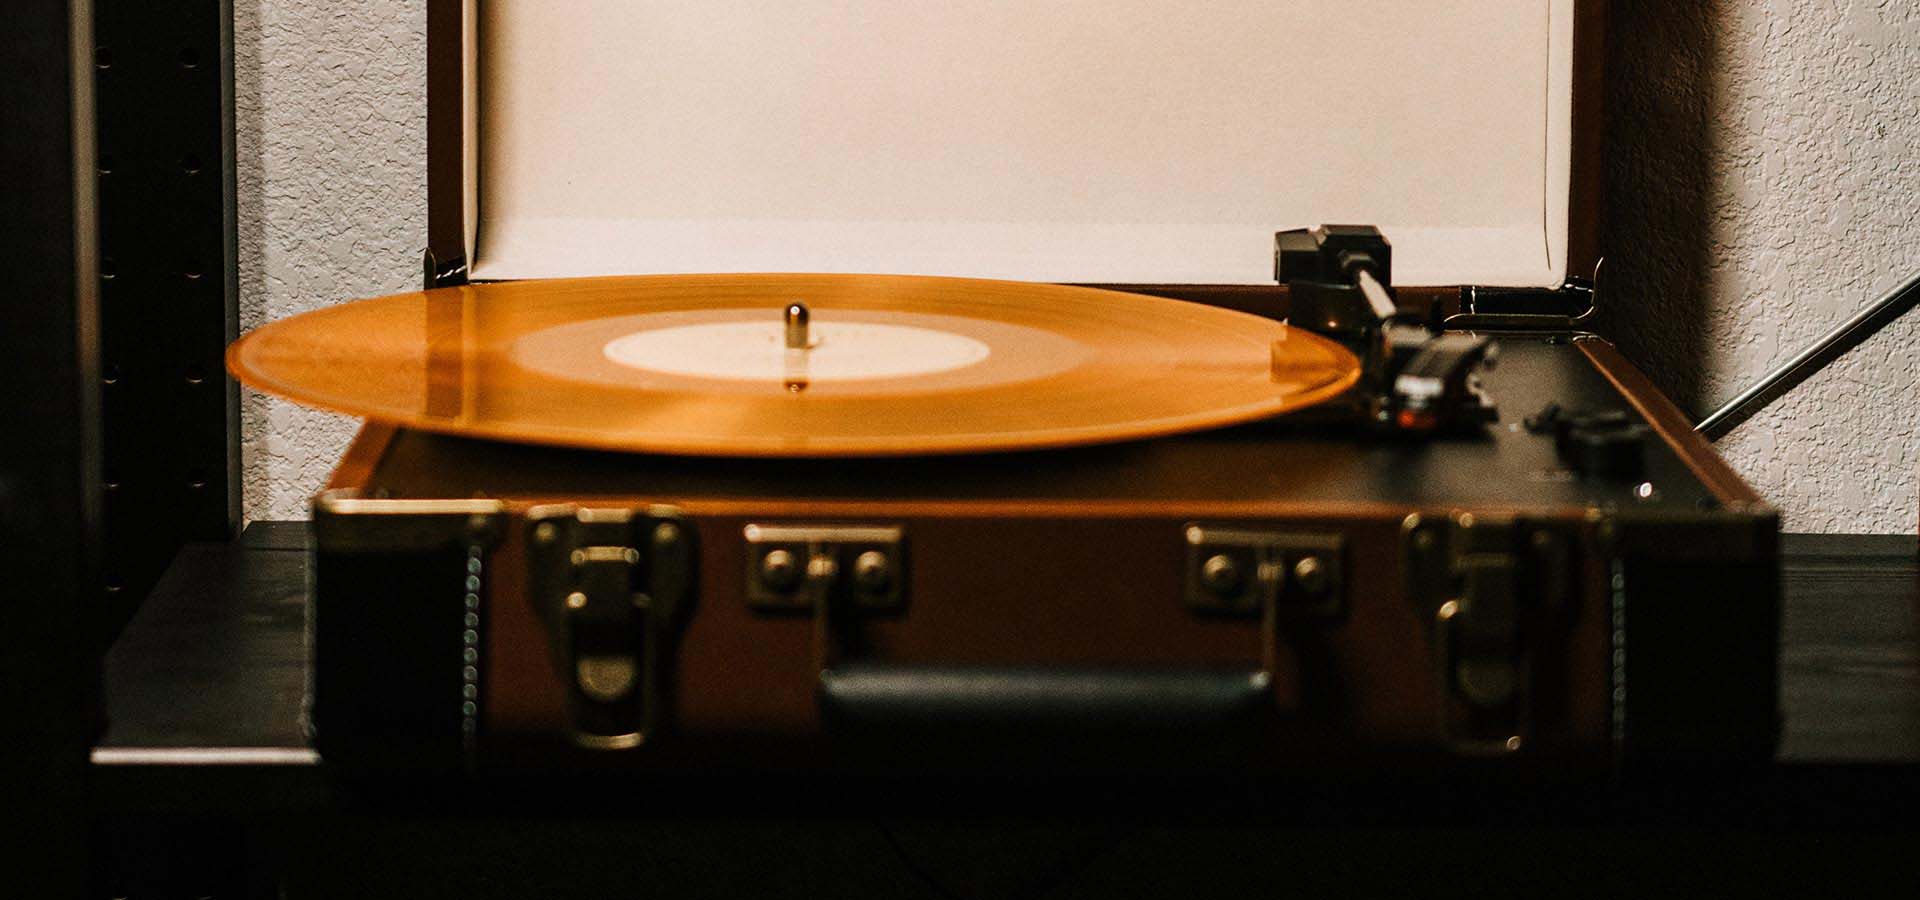 Record player with a gold record on top.